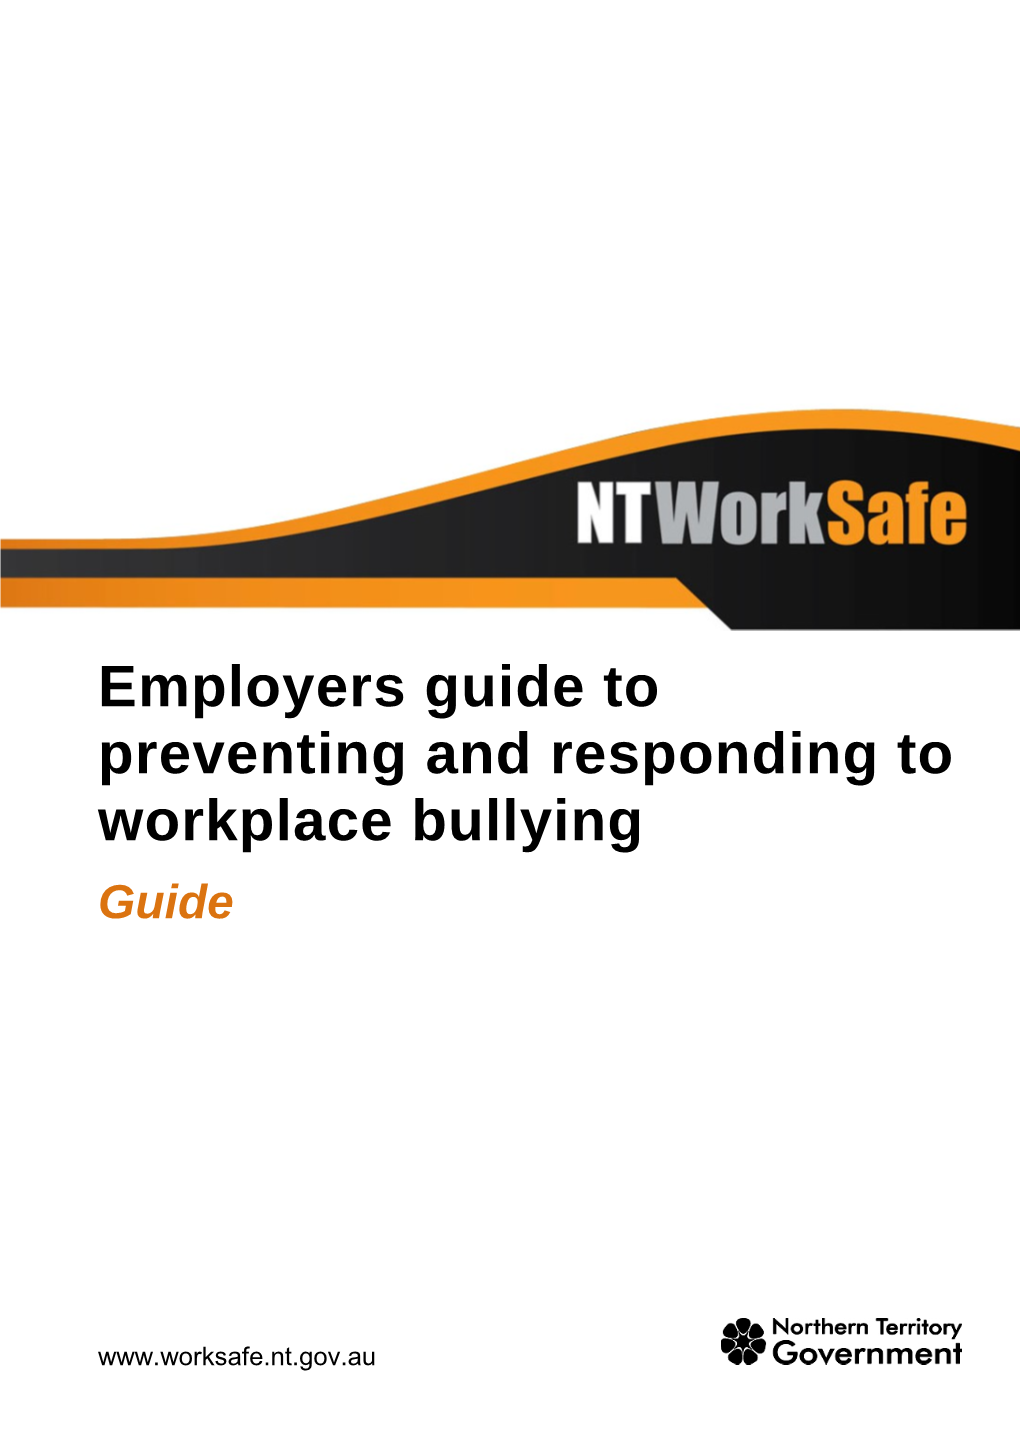 Employers Guide to Preventing and Responding to Workplace Bullying